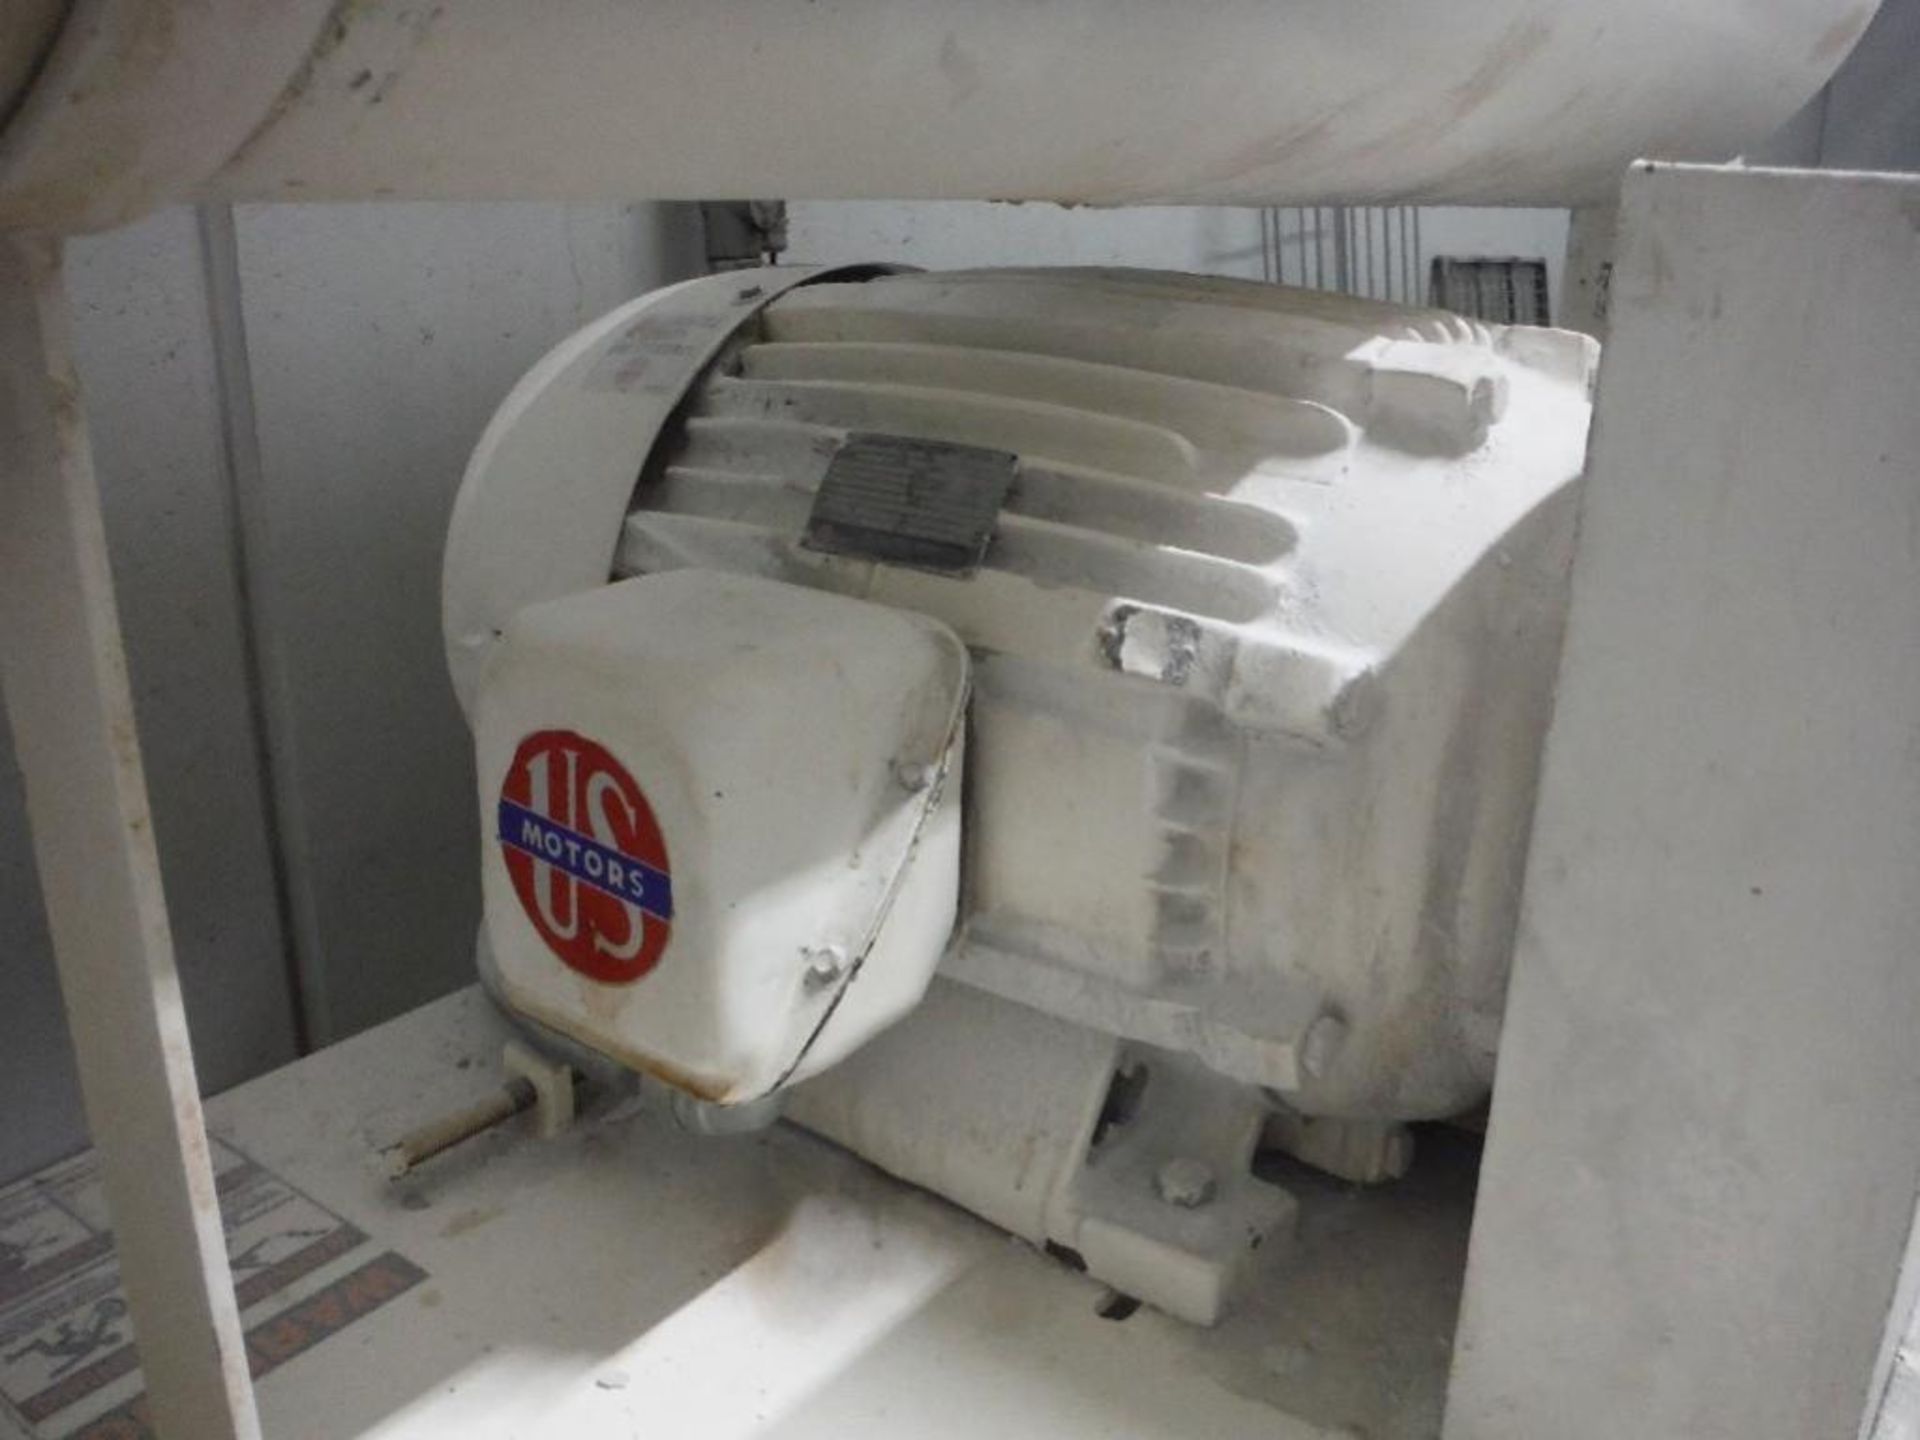 Shick rotary lobe blower, Model 96 G 91711, 50 hp - Rigging Fee: $300 - Image 6 of 7